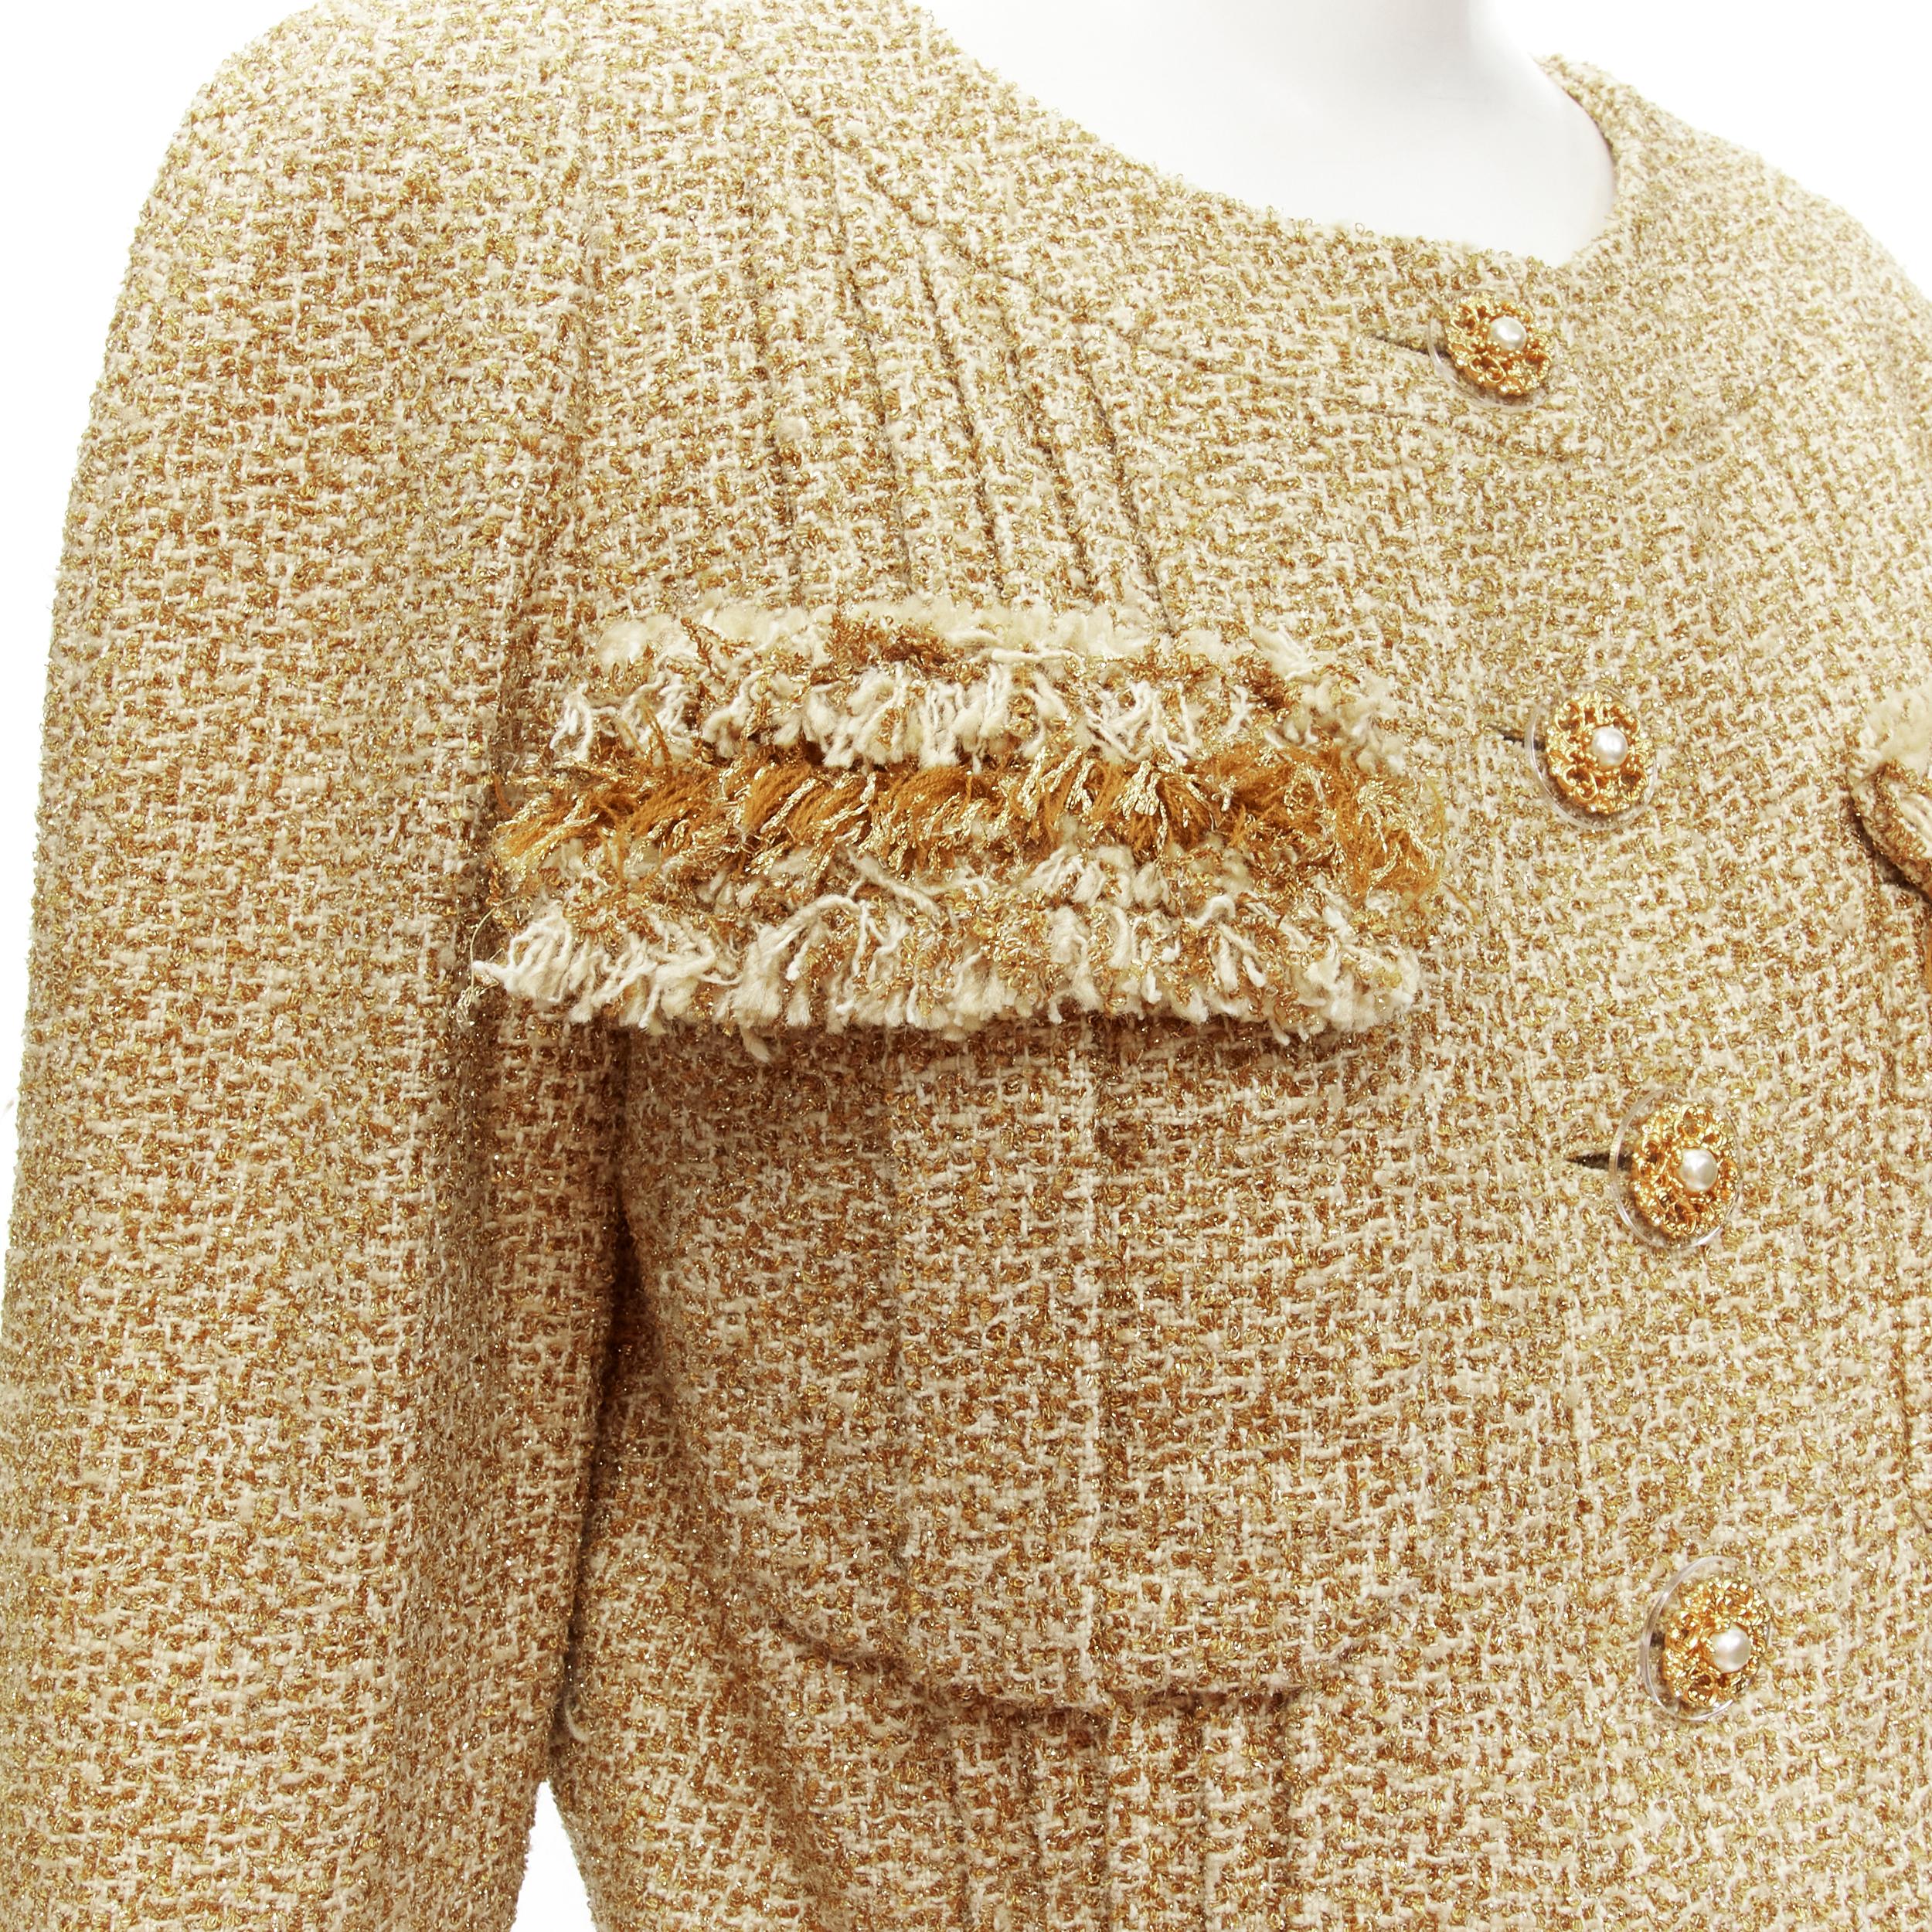 Chanel 13C Runway Versailles gold fluffy fringe CC button tweed jacket FR42 L
Reference: TGAS/C01862
Brand: Chanel
Designer: Karl Lagerfeld
Collection: 13C - Runway
Material: Tweed
Color: Gold
Pattern: Solid
Closure: Button
Lining: Gold Silk
Extra